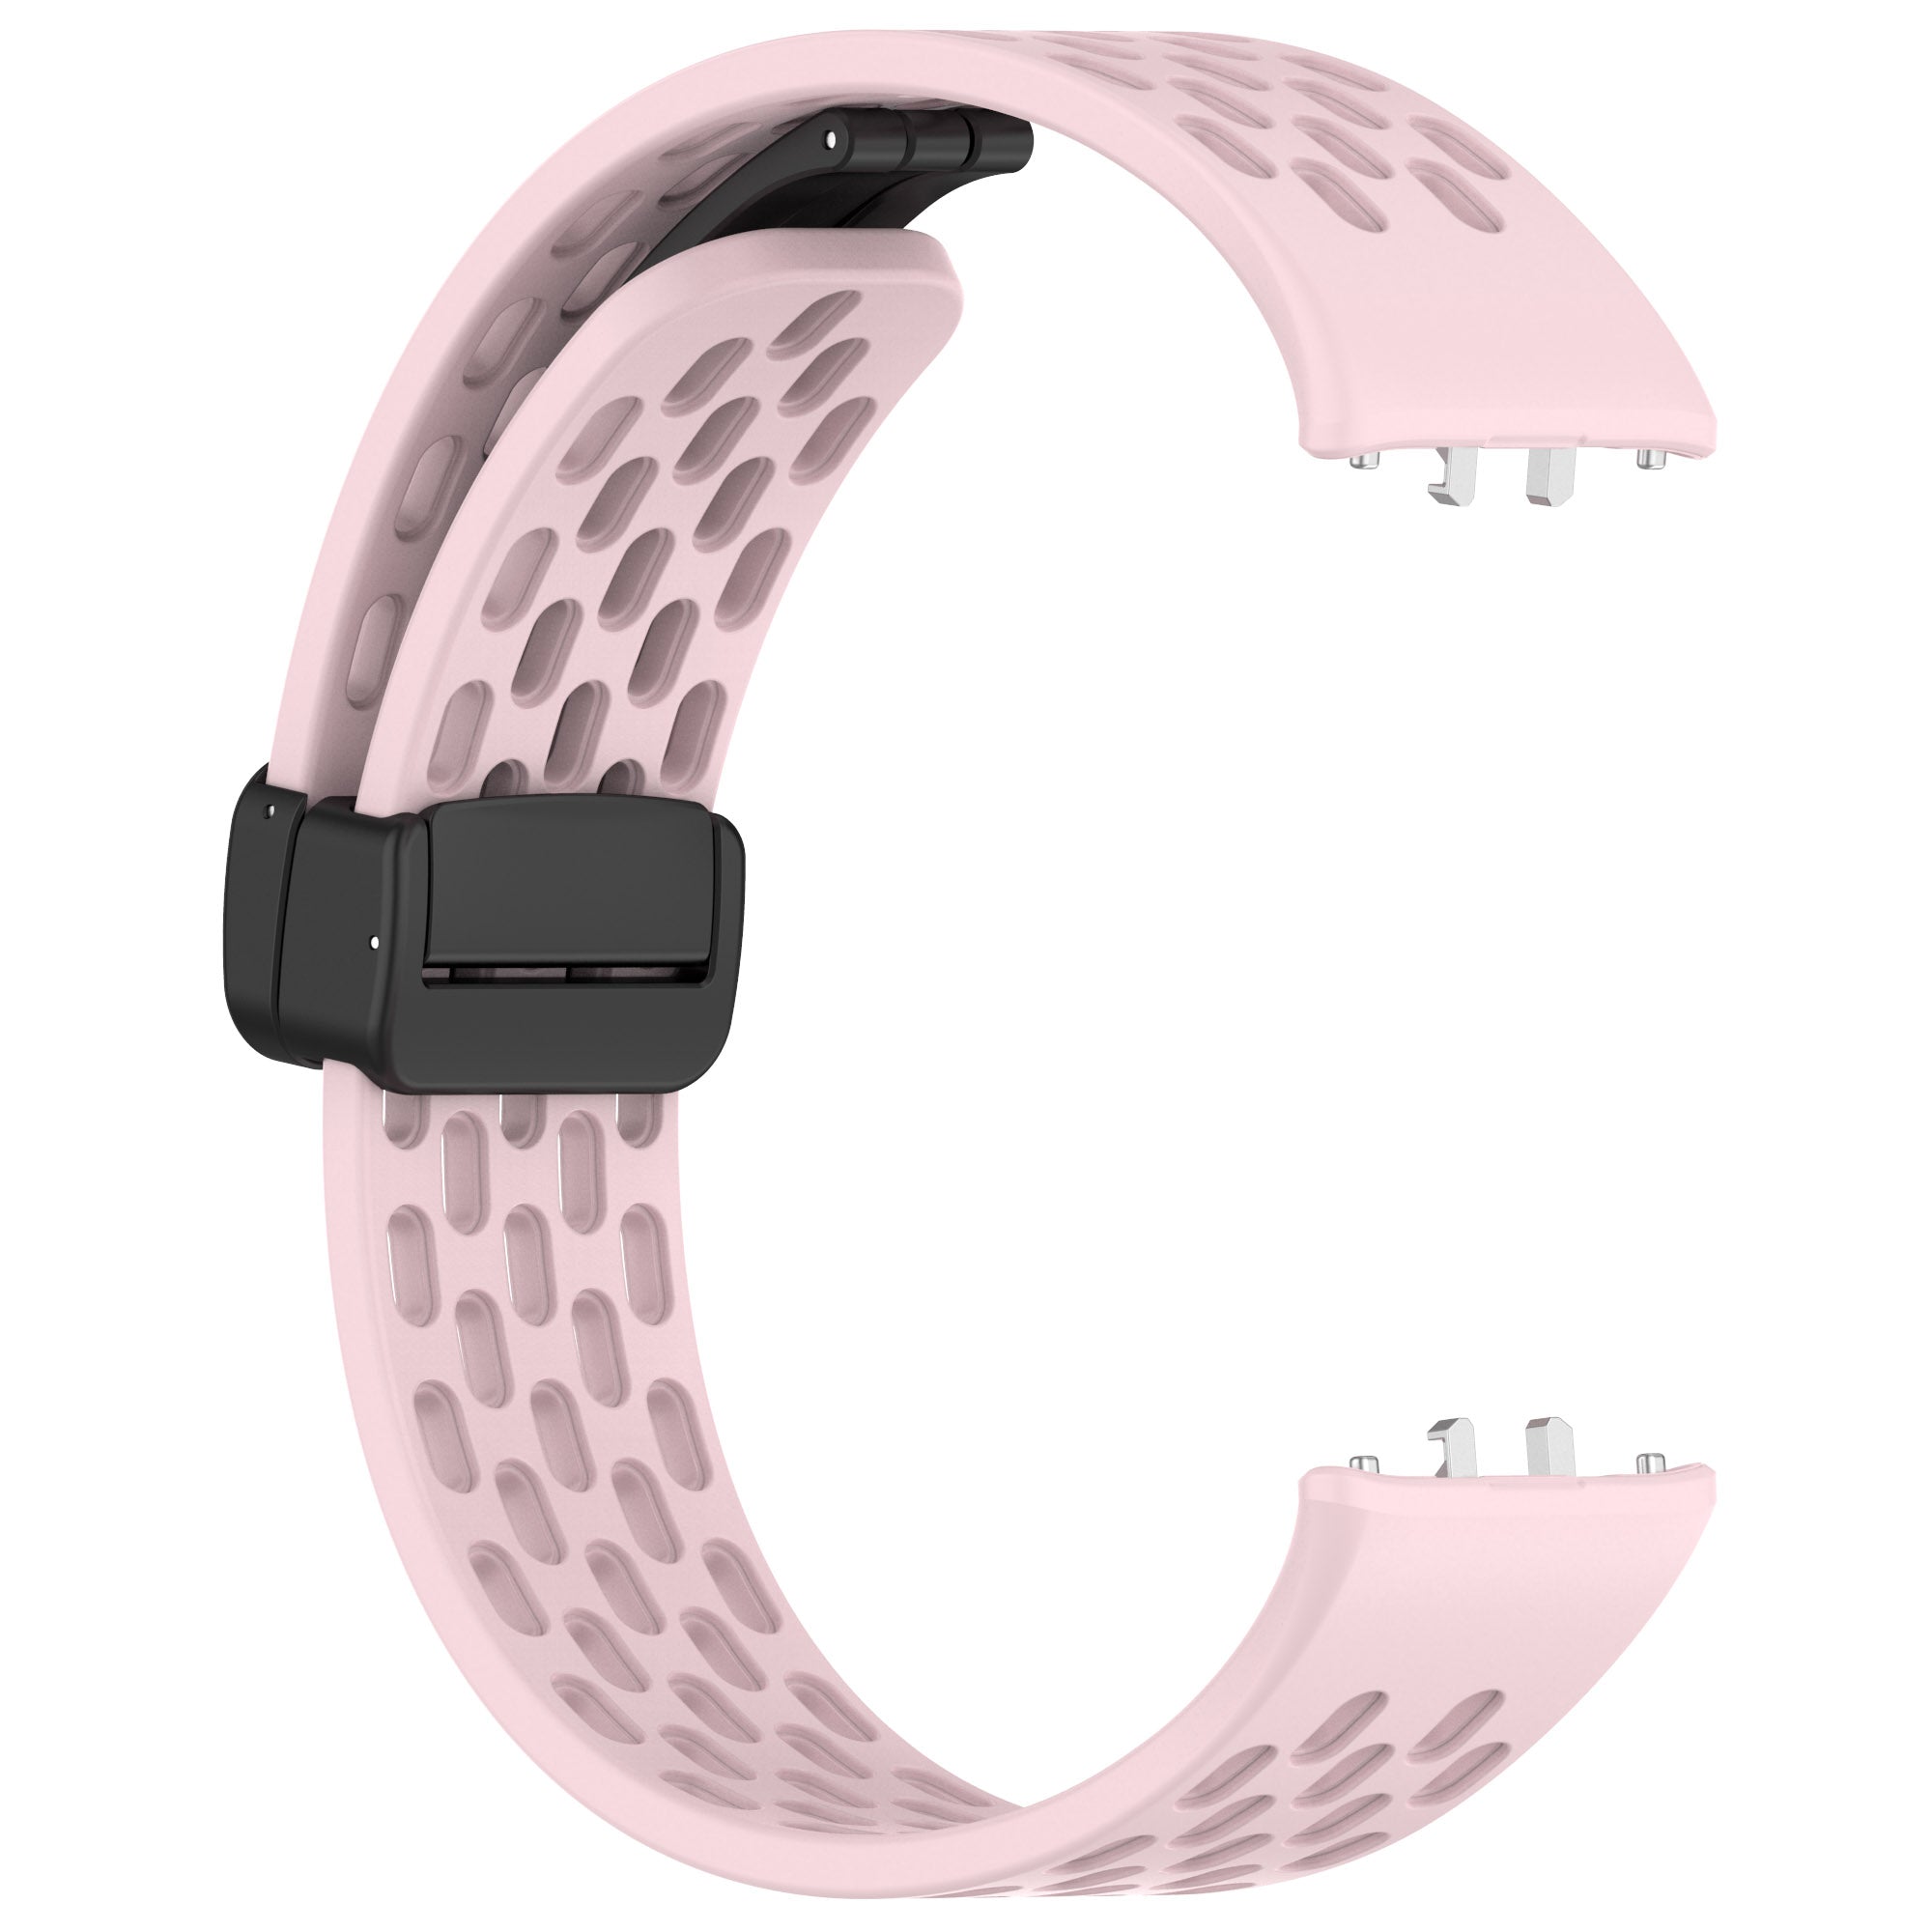 Wrist Band for Samsung Galaxy Fit3 R930 Magnetic Silicone Smartwatch Bracelet Strap - Pink